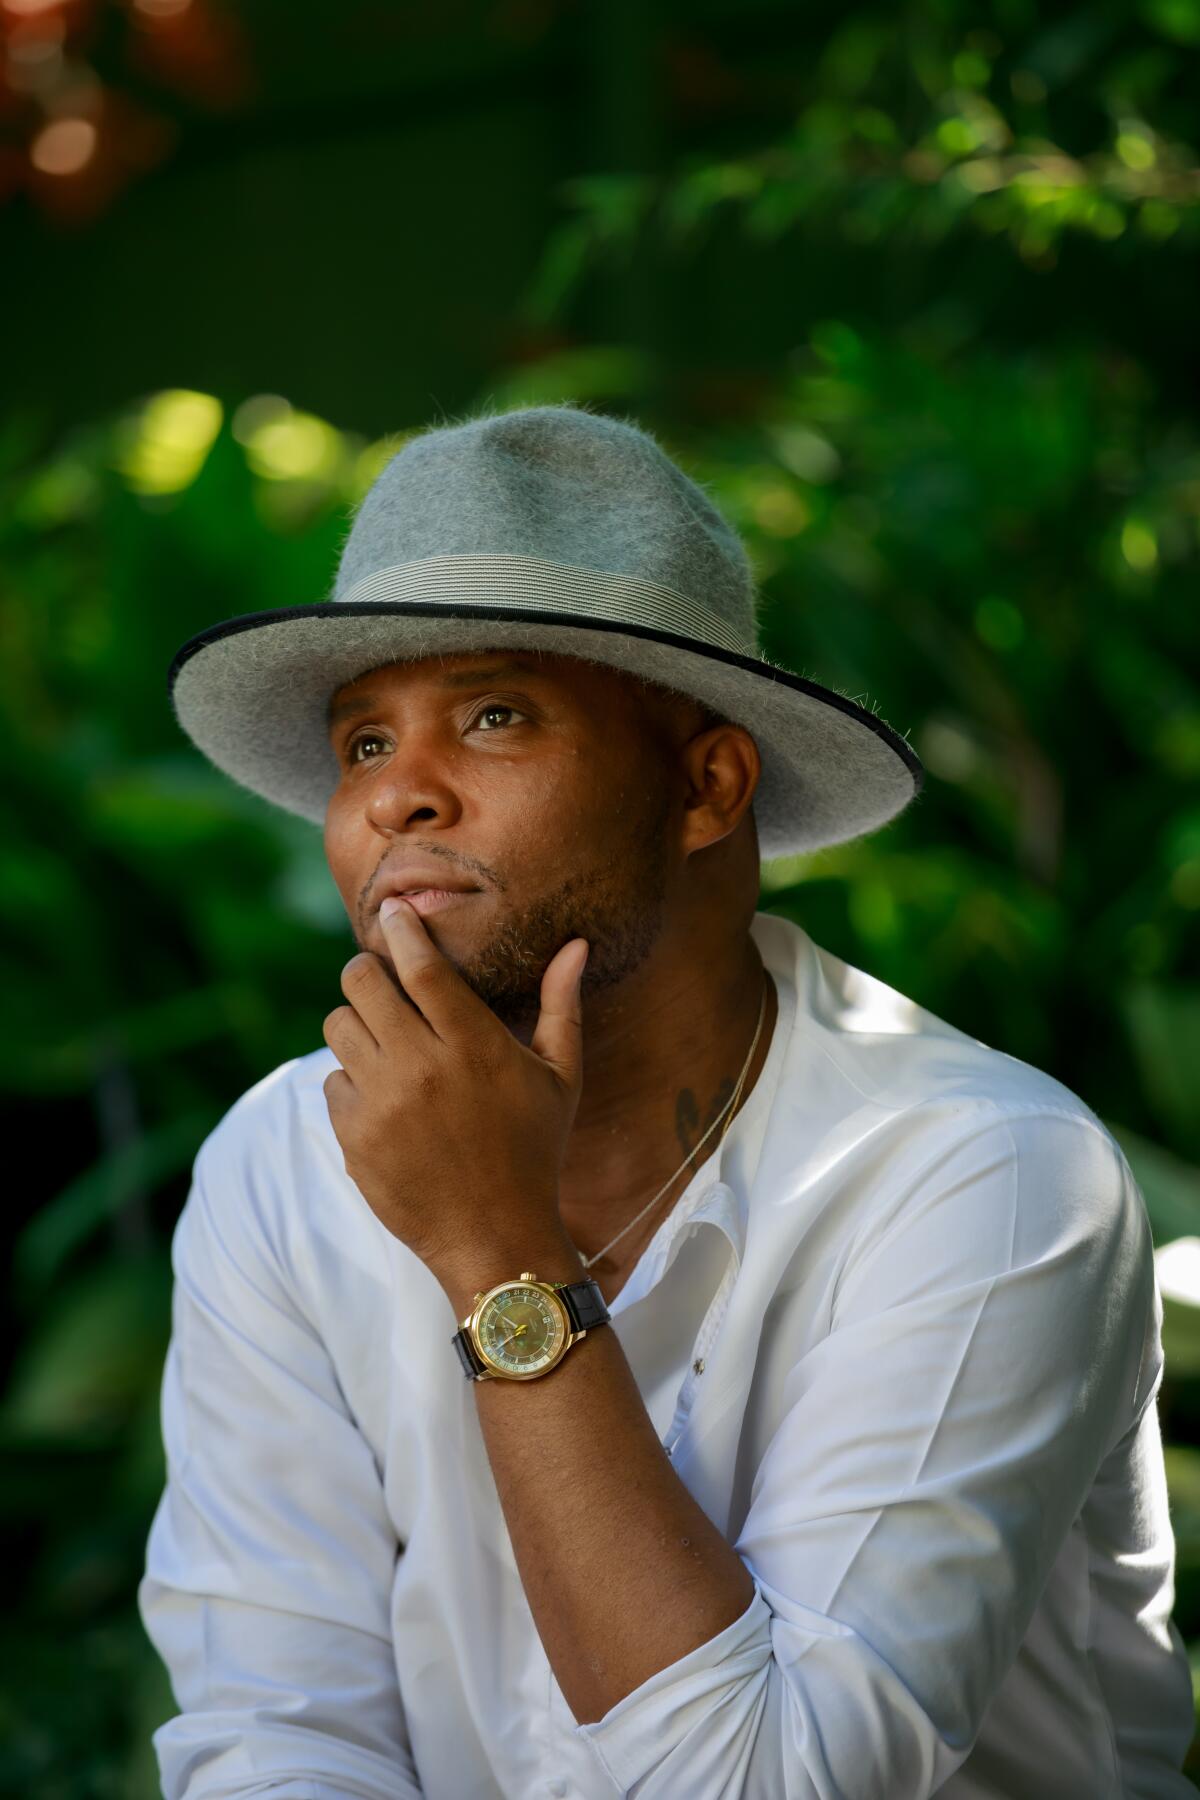 A man in a white shirt and hat places his hand on his chin